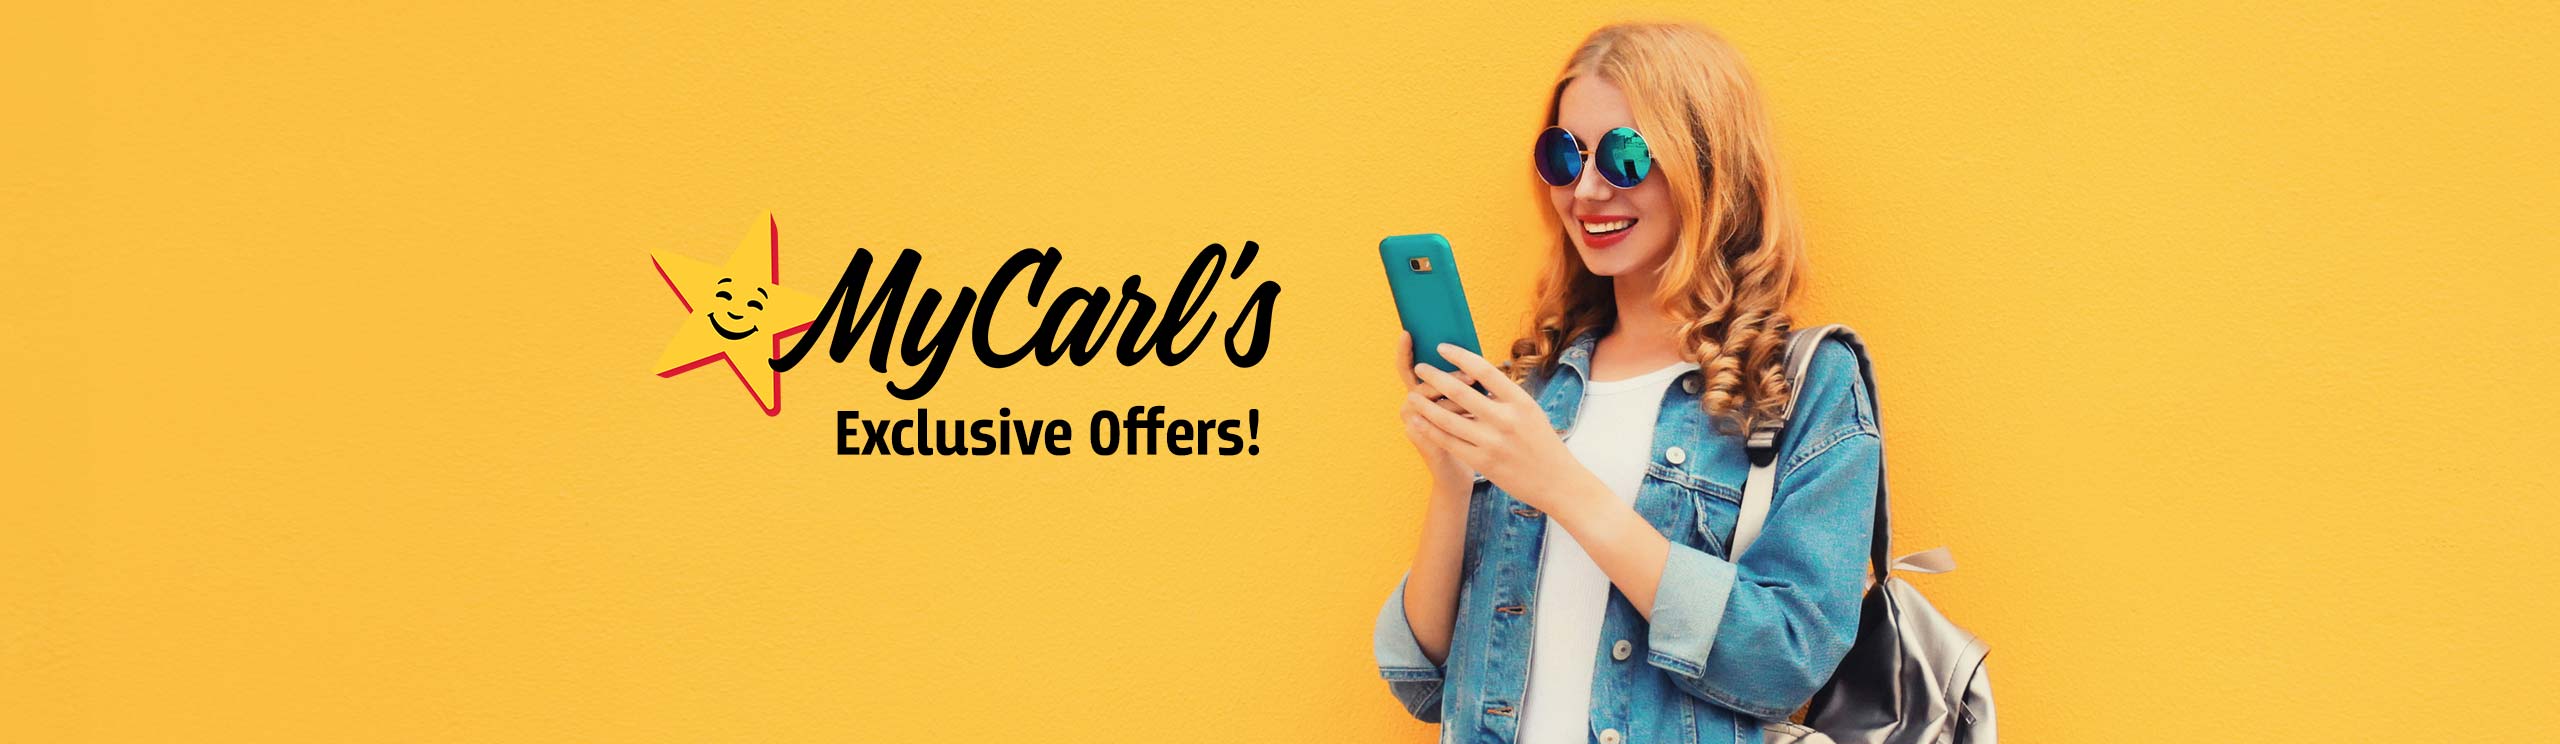 MyCarl's Exclusive Offers